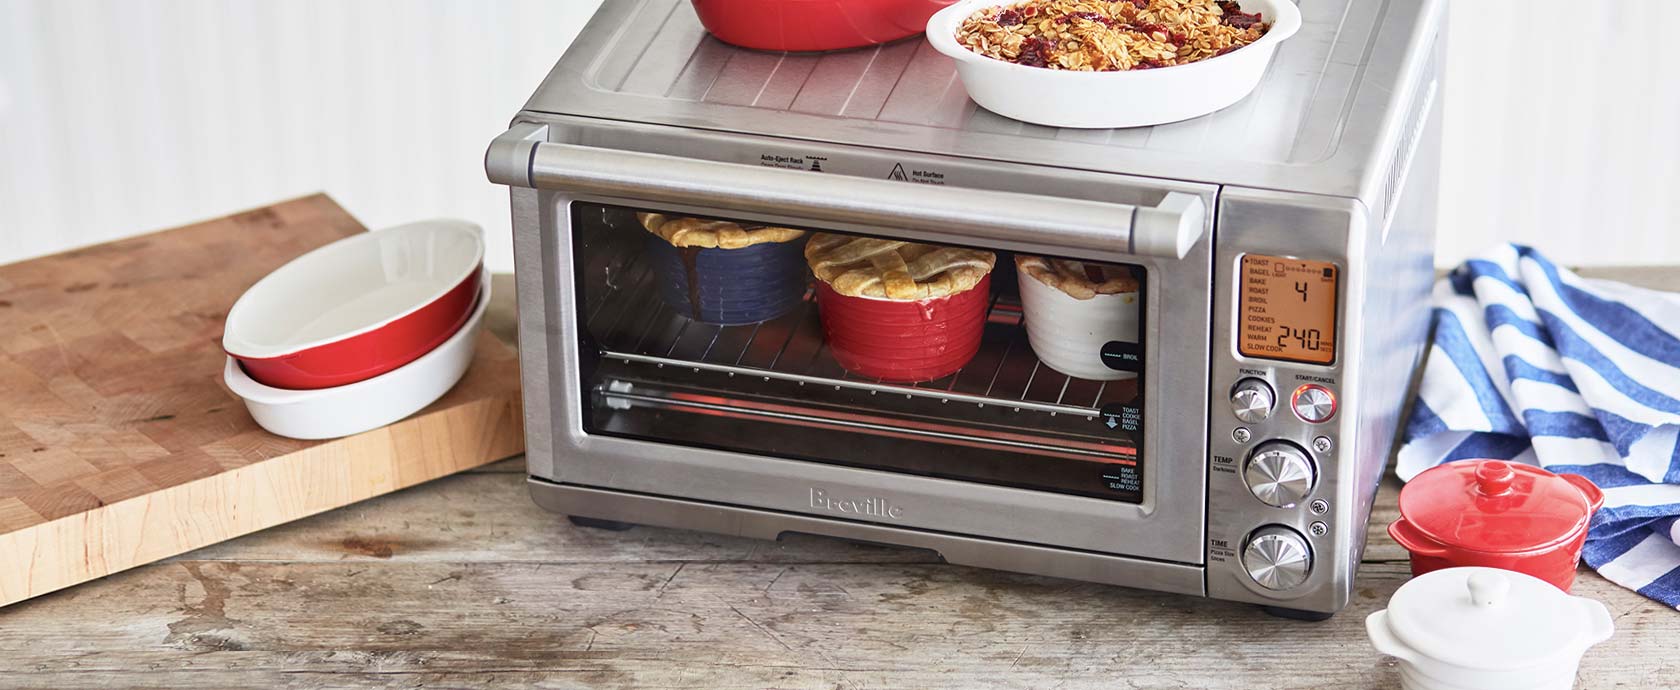 Breville Smart Oven Pro with blue, red and white ramekins